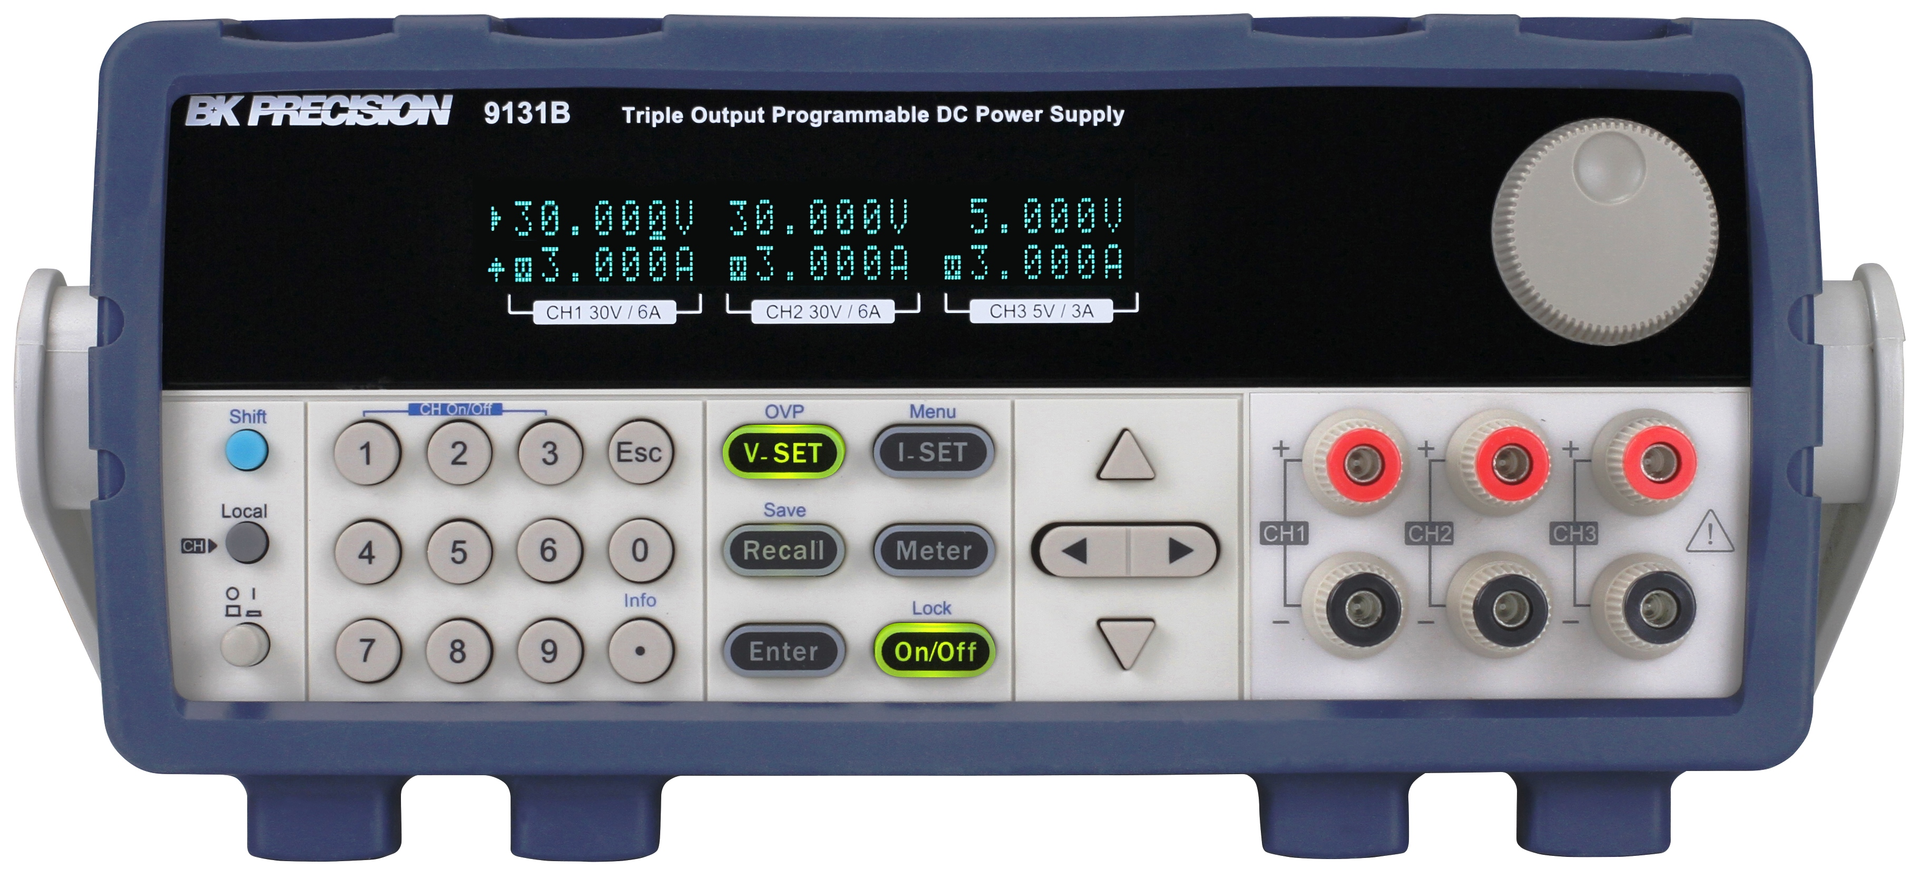 B&K Precision 1670ATCAL Triple Output Digital Display DC Power Supply 3 Amp with a NIST-Traceable Calibration Certificate with Data 30V 